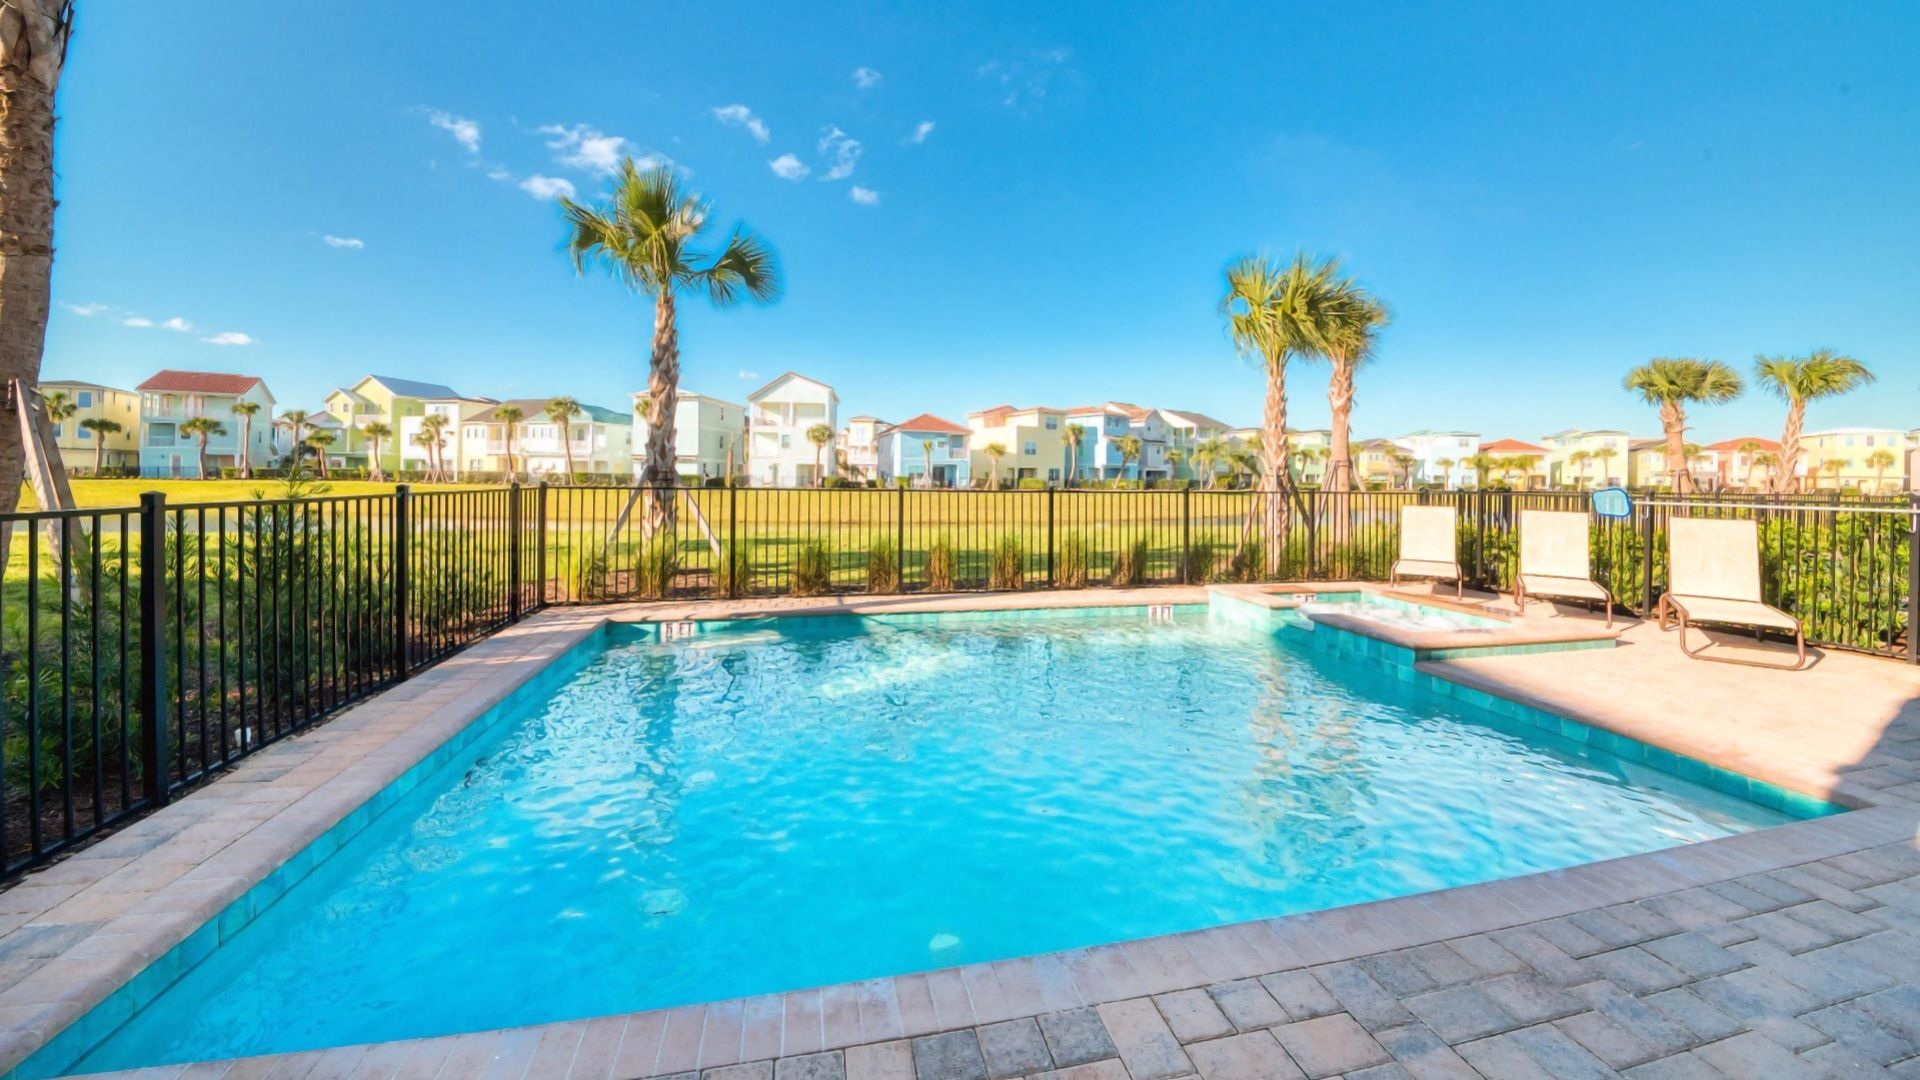 Private Pool And Hot Tub Of A 7-bedroom Cottage With View Of Row Of Margaritaville Resort Orlando Cottages.